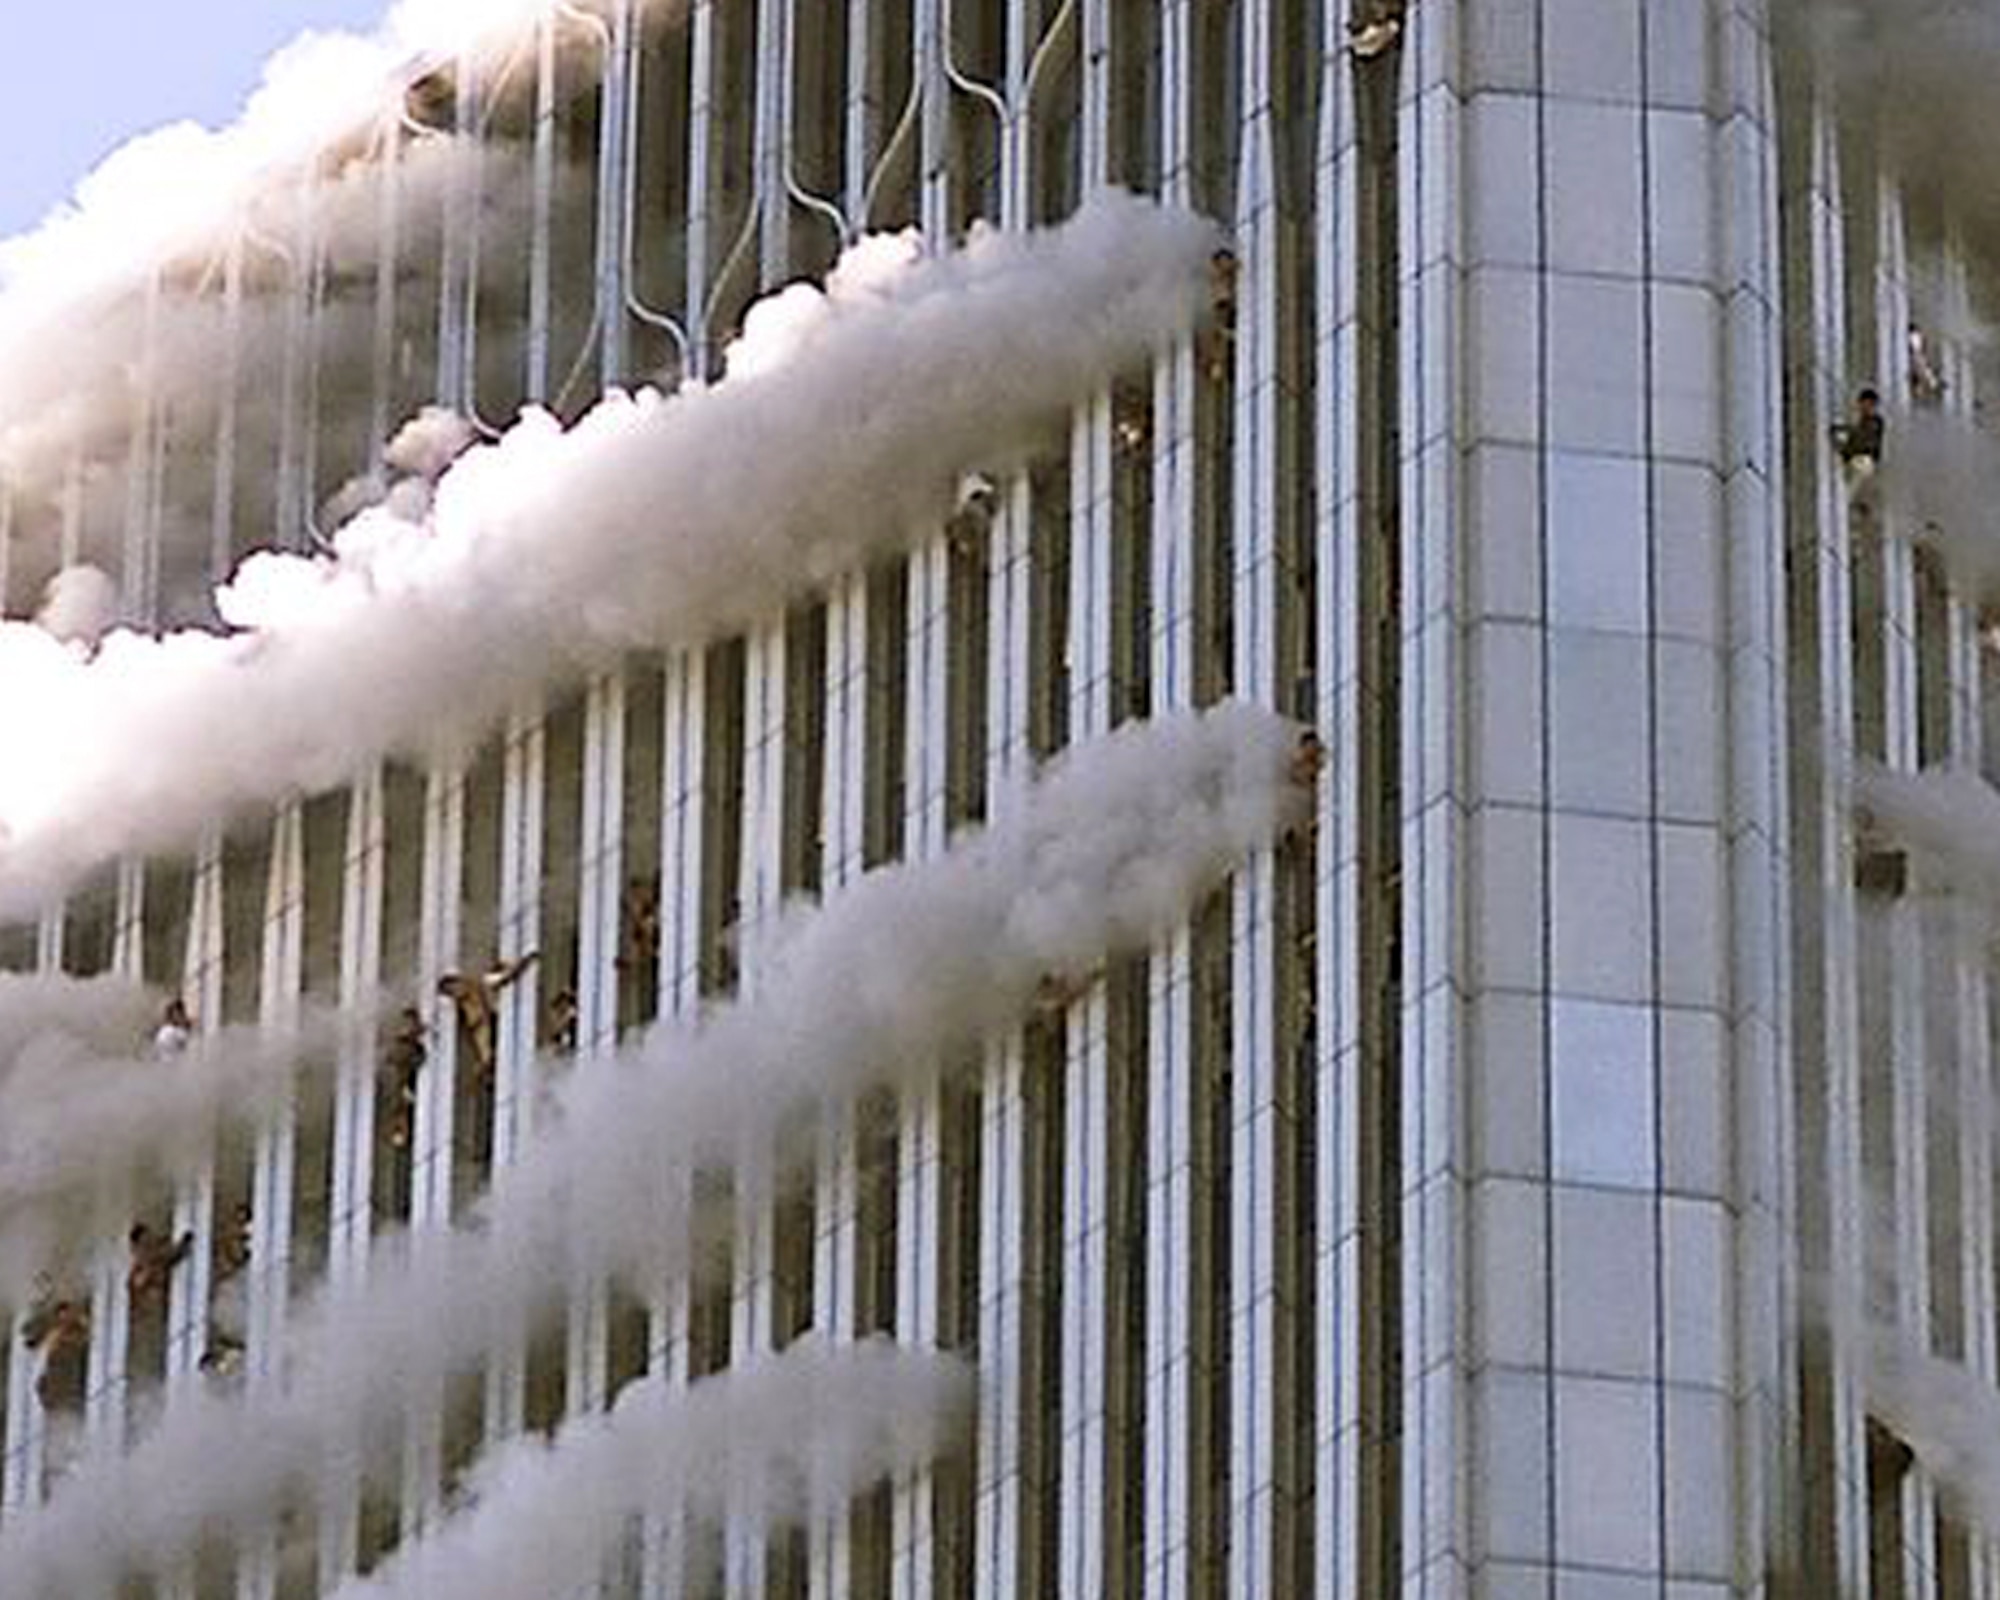 Driven out of the building by fires and scorching temperatures, people near the top of the World Trade Center’s North Tower hang from windows as high as 1,300-feet above the streets of New York City, Sept. 11, 2001. Hijackers crashed American Airlines Flight 11 into floors 93 through 99 of the North Tower. (Getty Images photo by Jose Jimenez/Released)